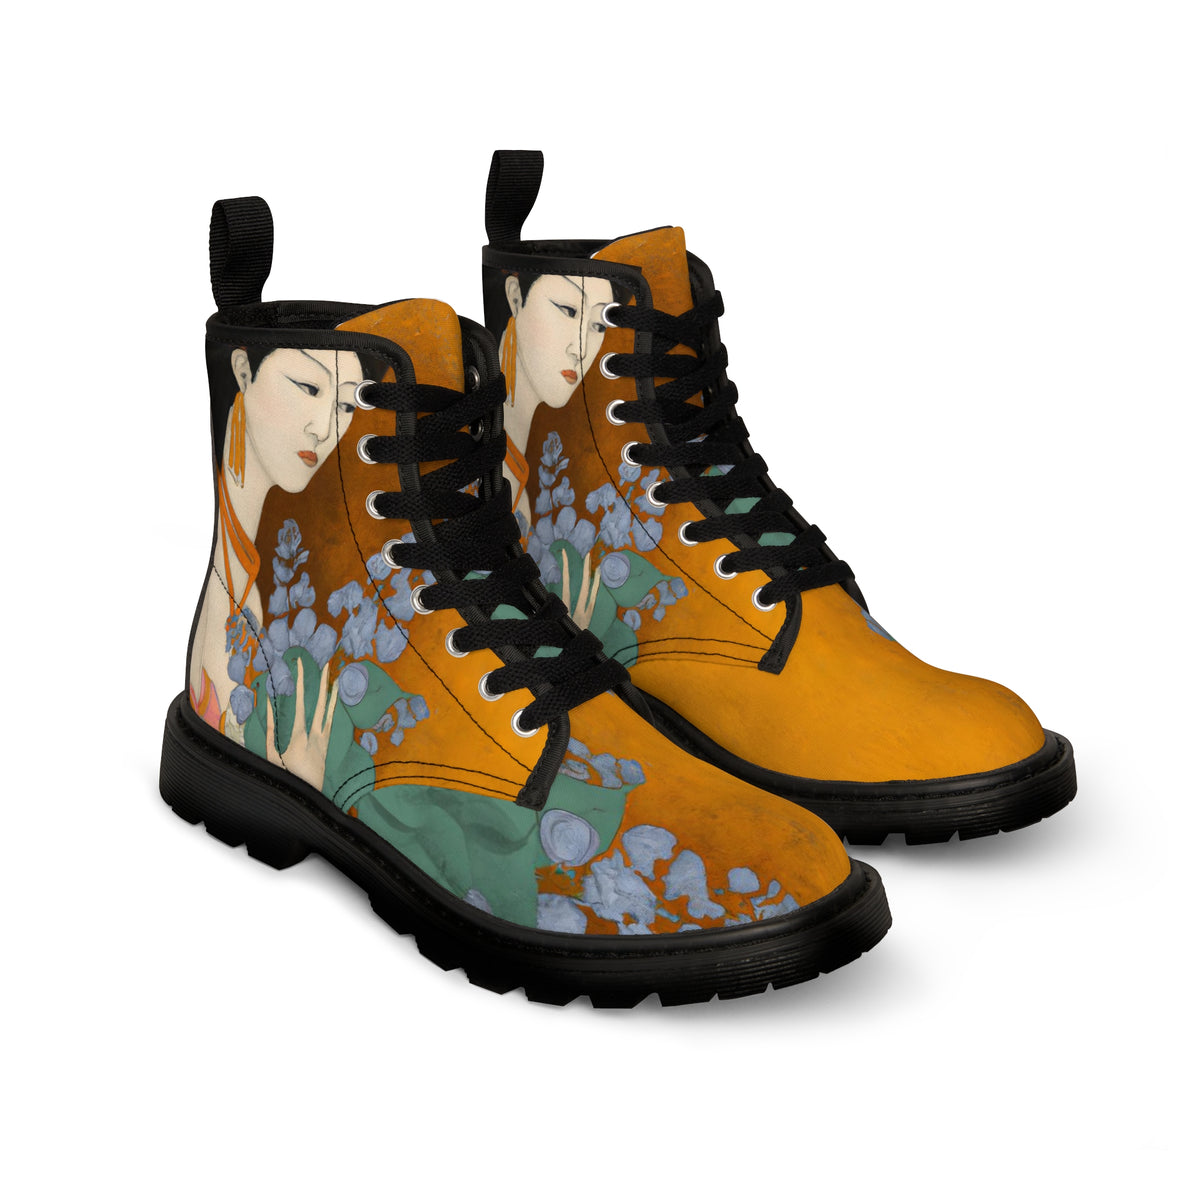 Woman's canvas boots with a painted image of a Geisha holding some violets